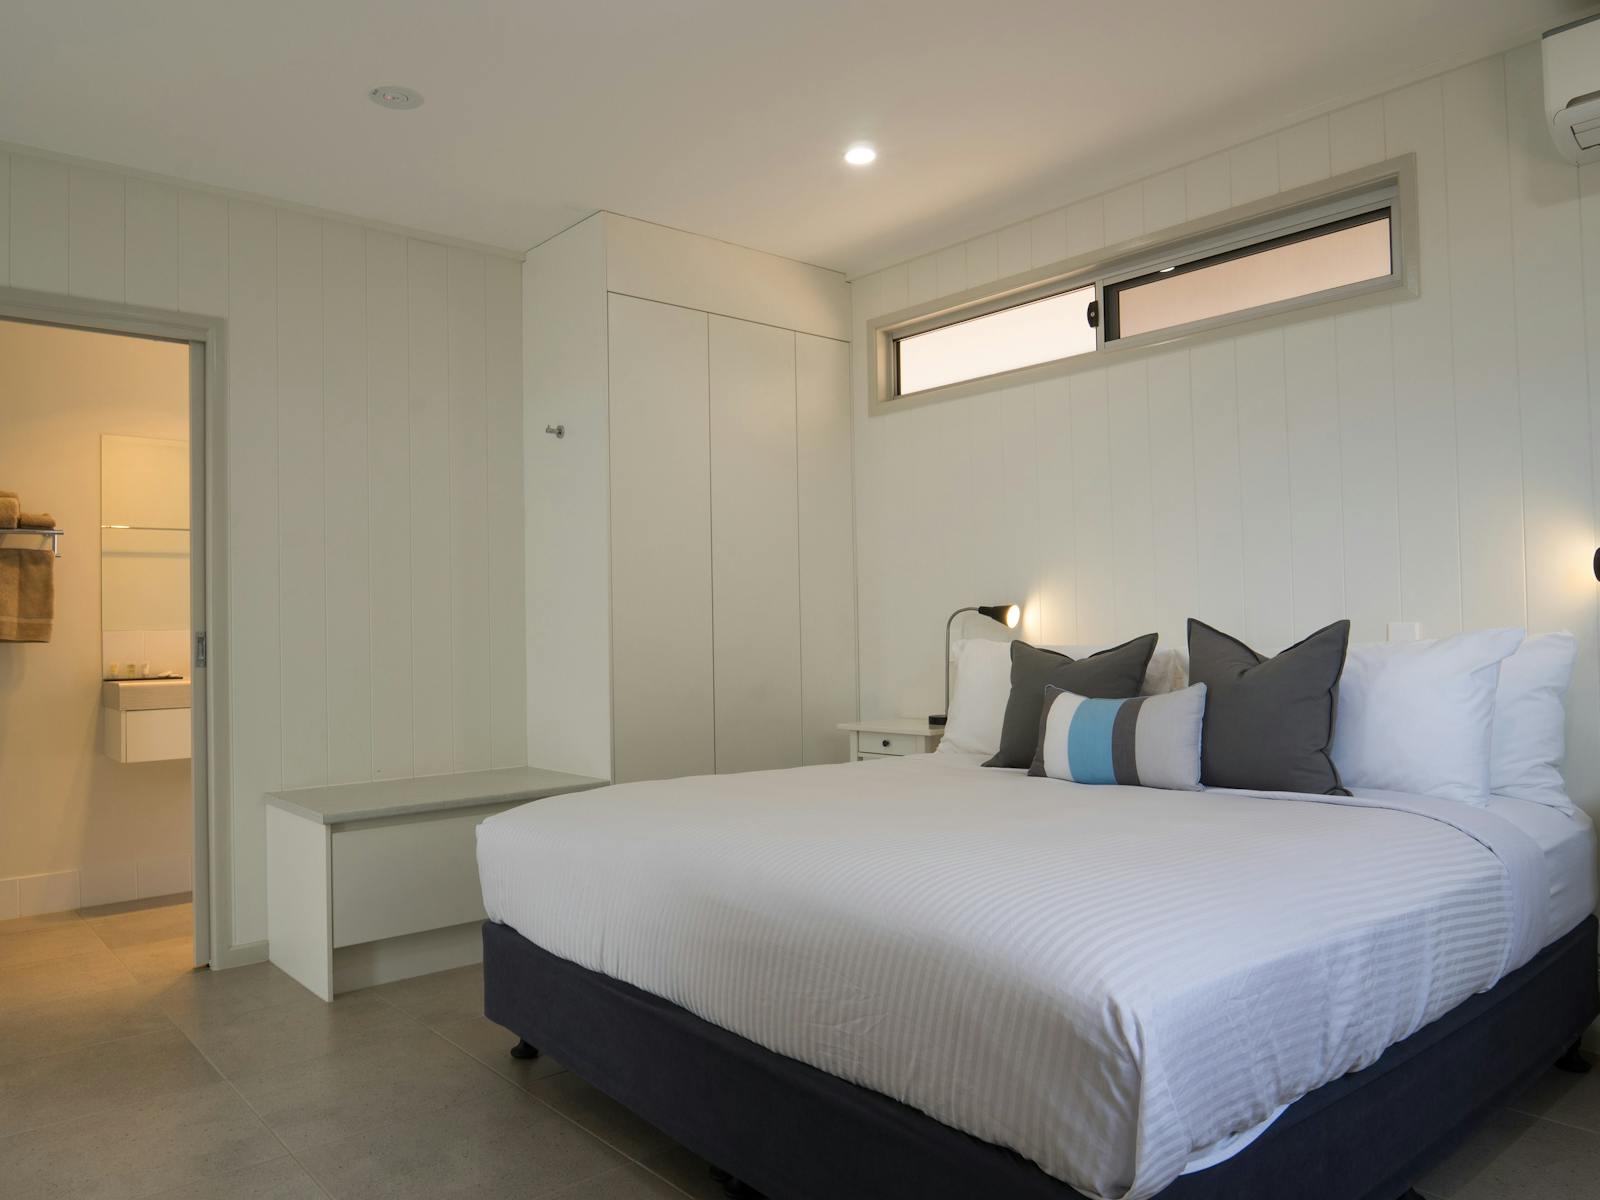 Each Outback Family Suite includes One king bed and two x-long single beds.